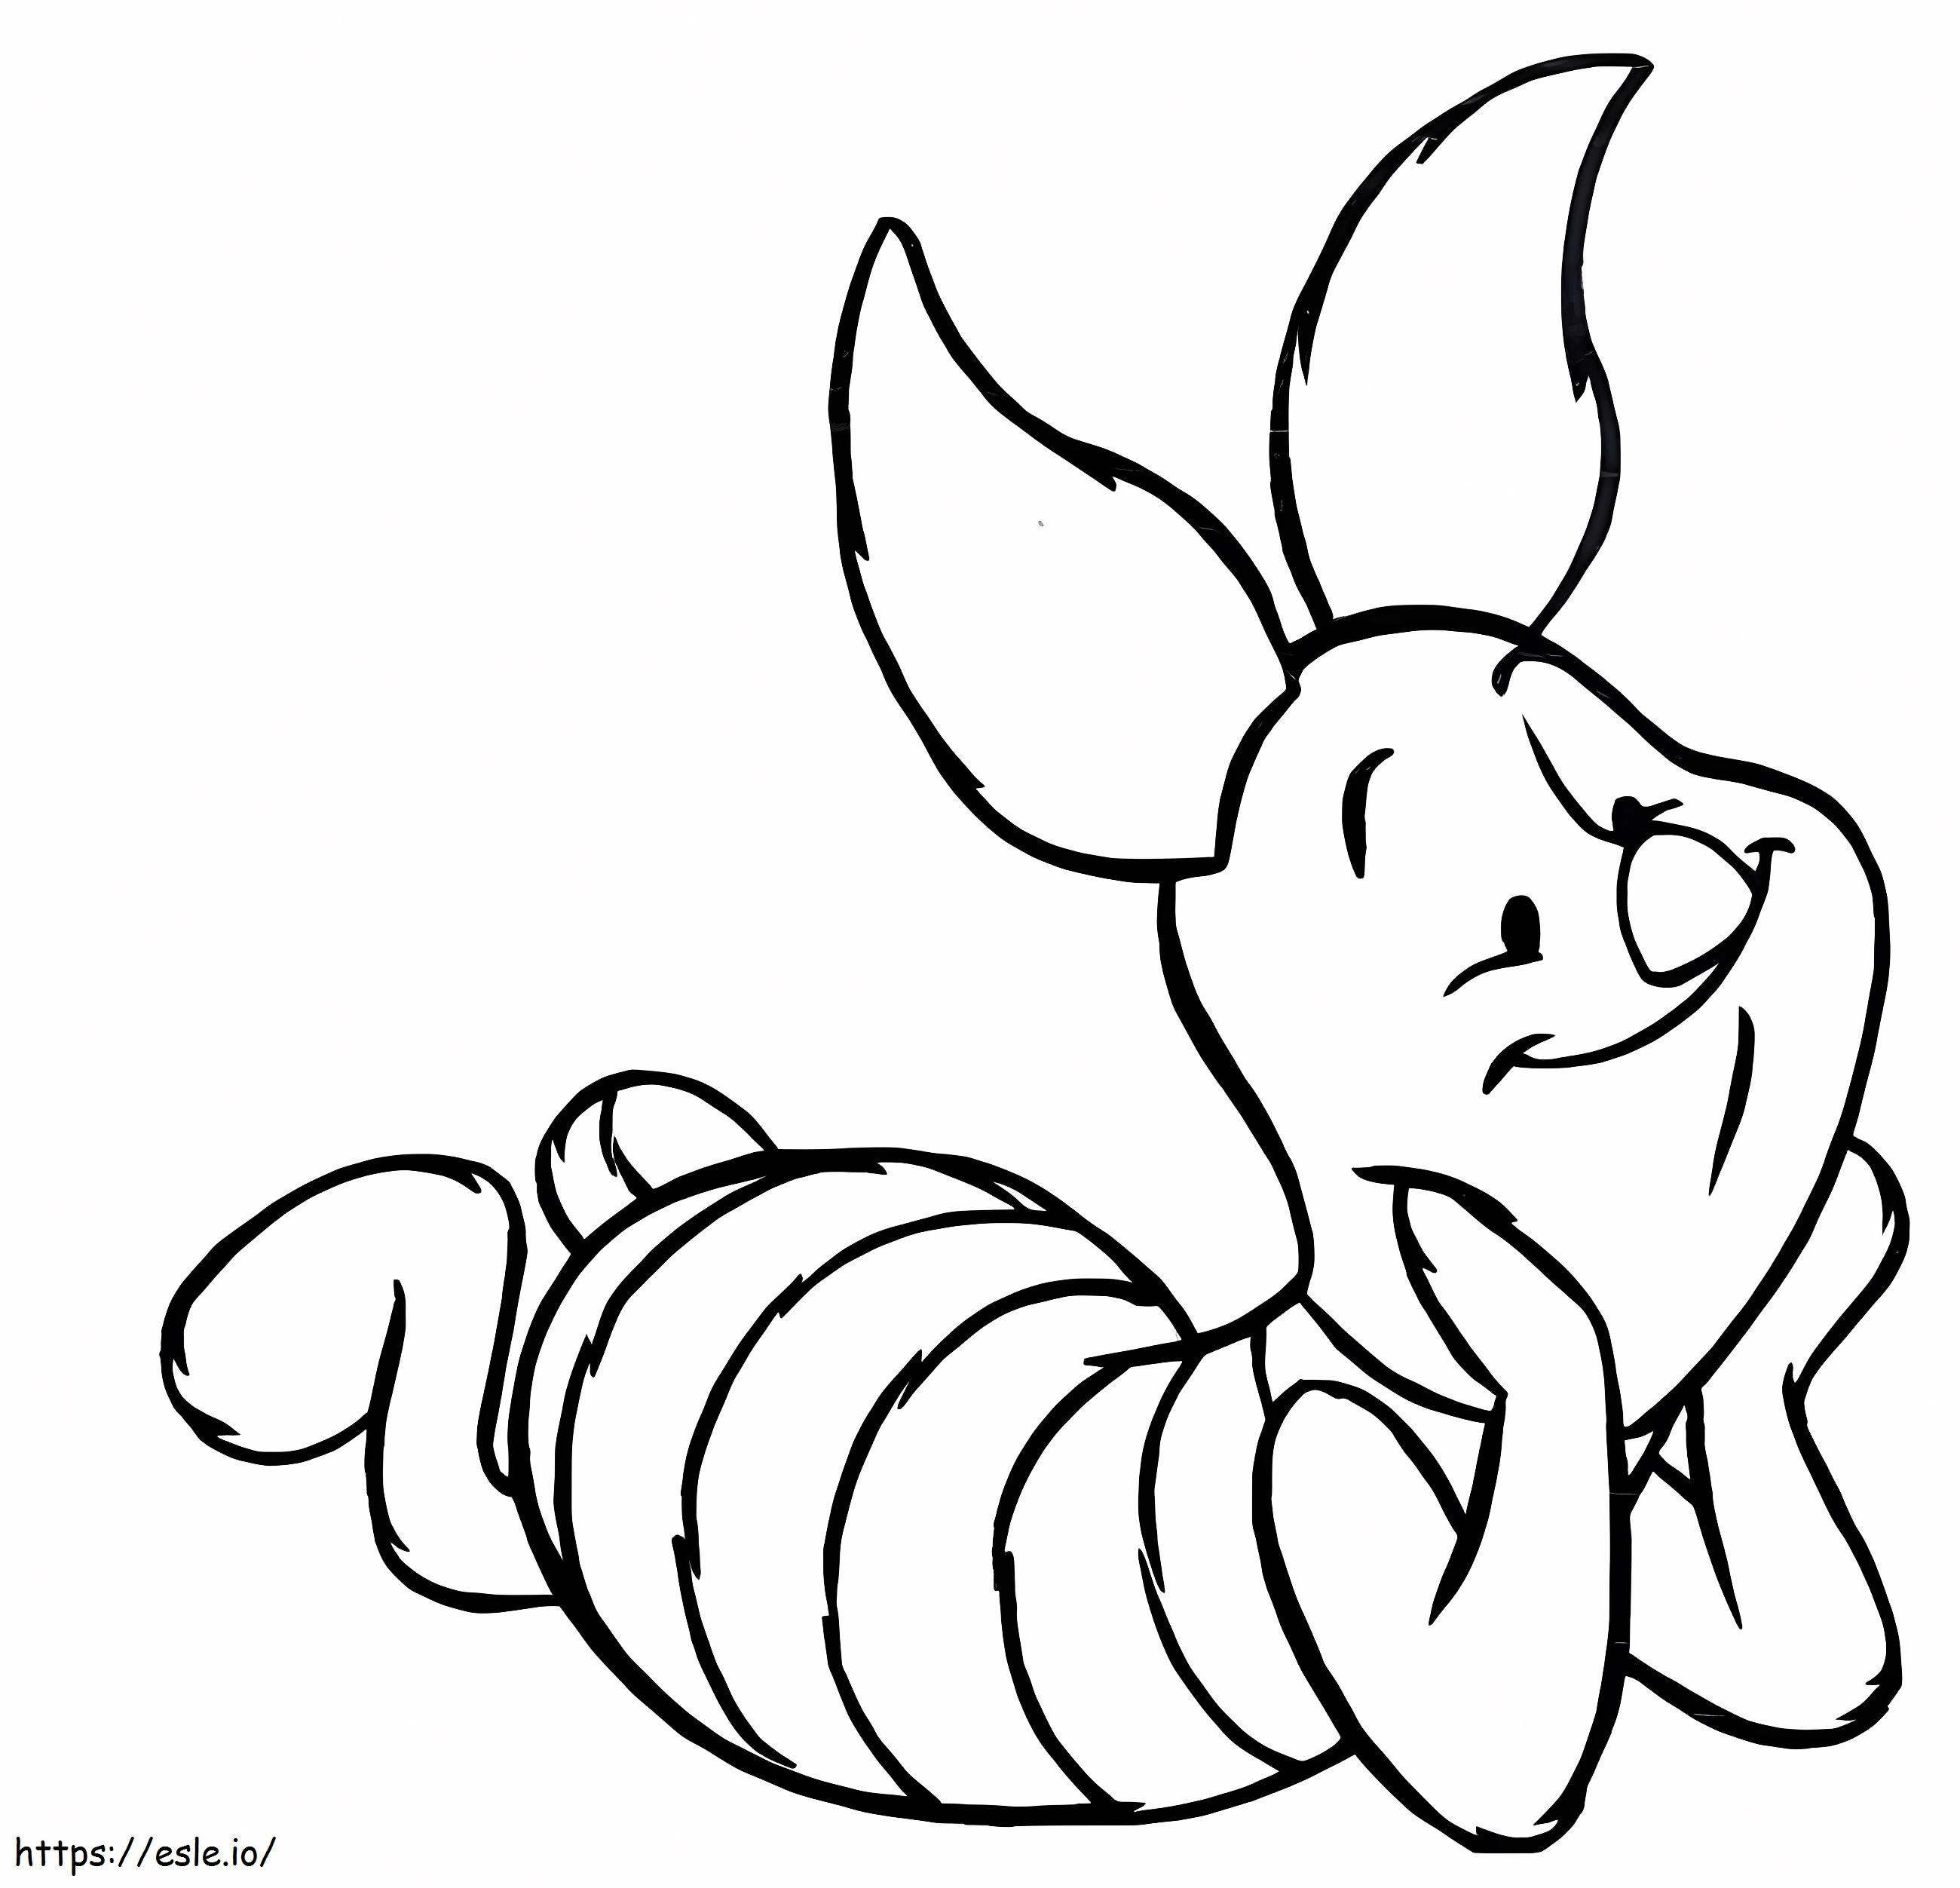 Piglet Is Lying Down coloring page